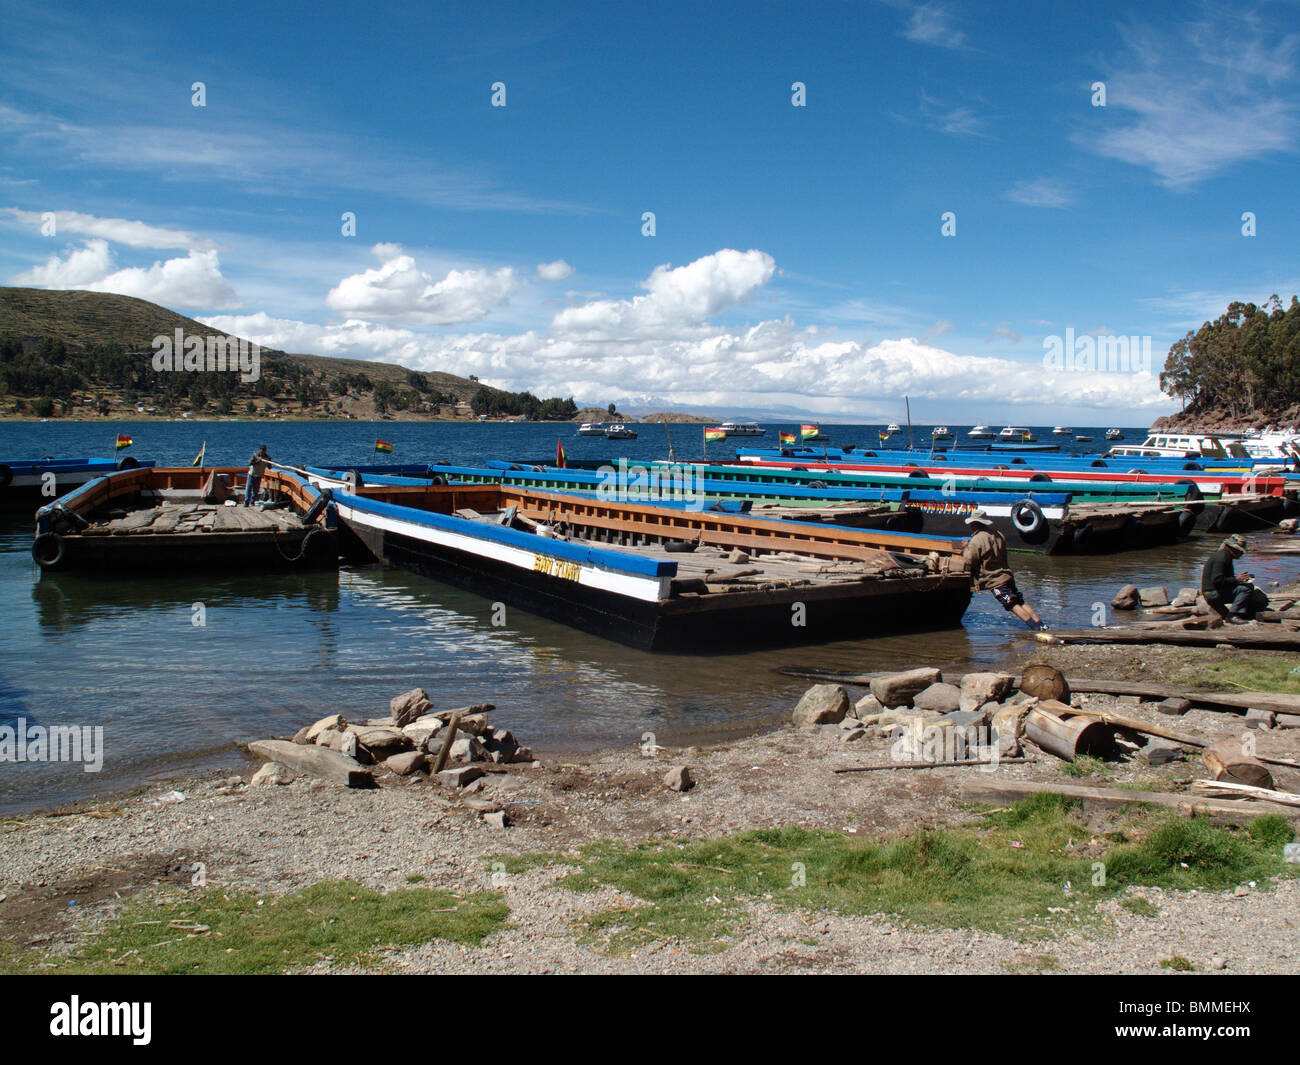 Wooden barge ferry used to transport vehicles across the southern end of Lake Titicaca at Tiquina in Bolivia Stock Photo